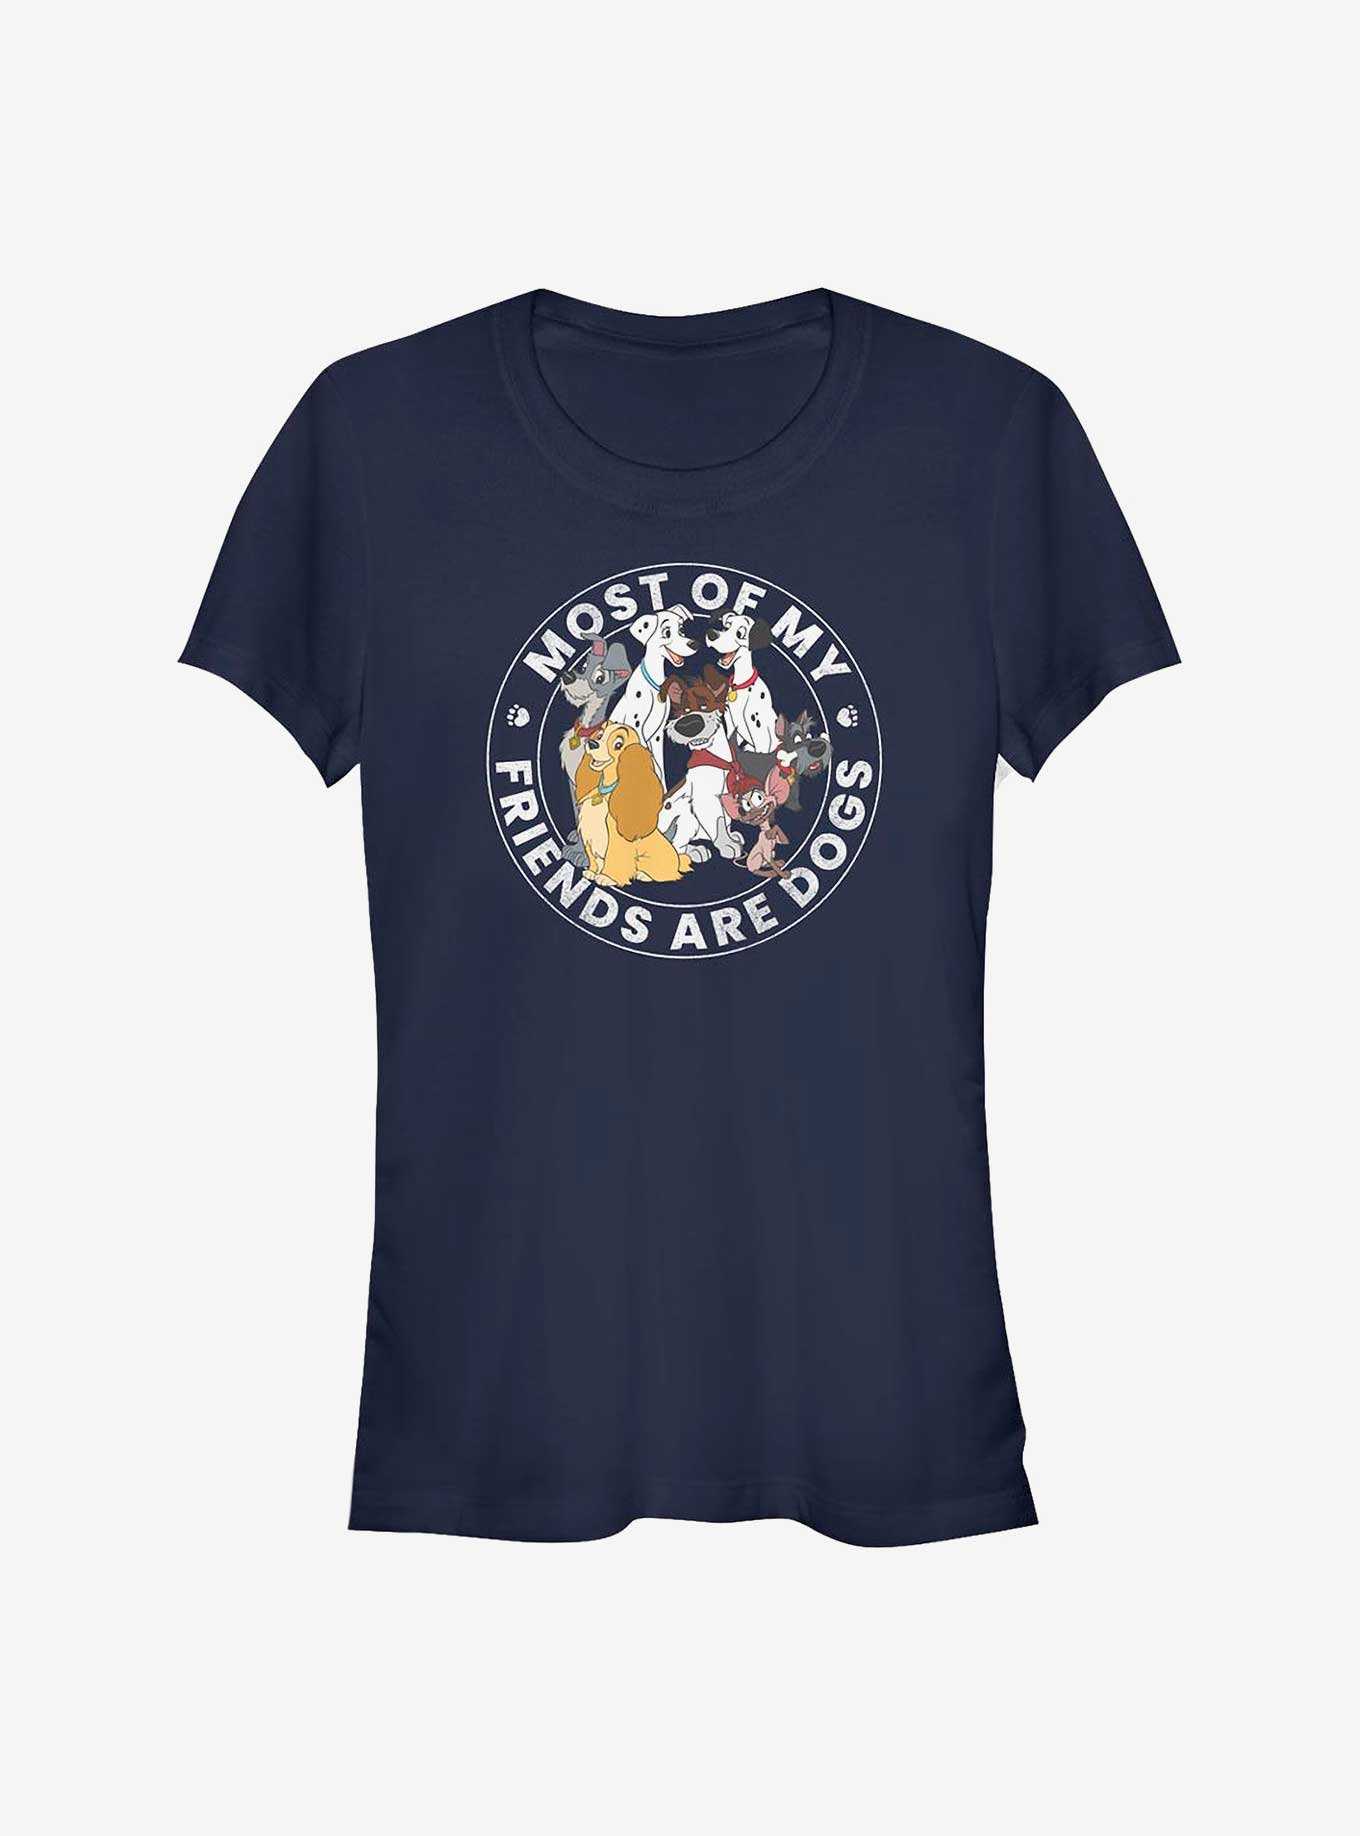 Disney Most Of My Friends Are Dogs Girls T-Shirt, , hi-res